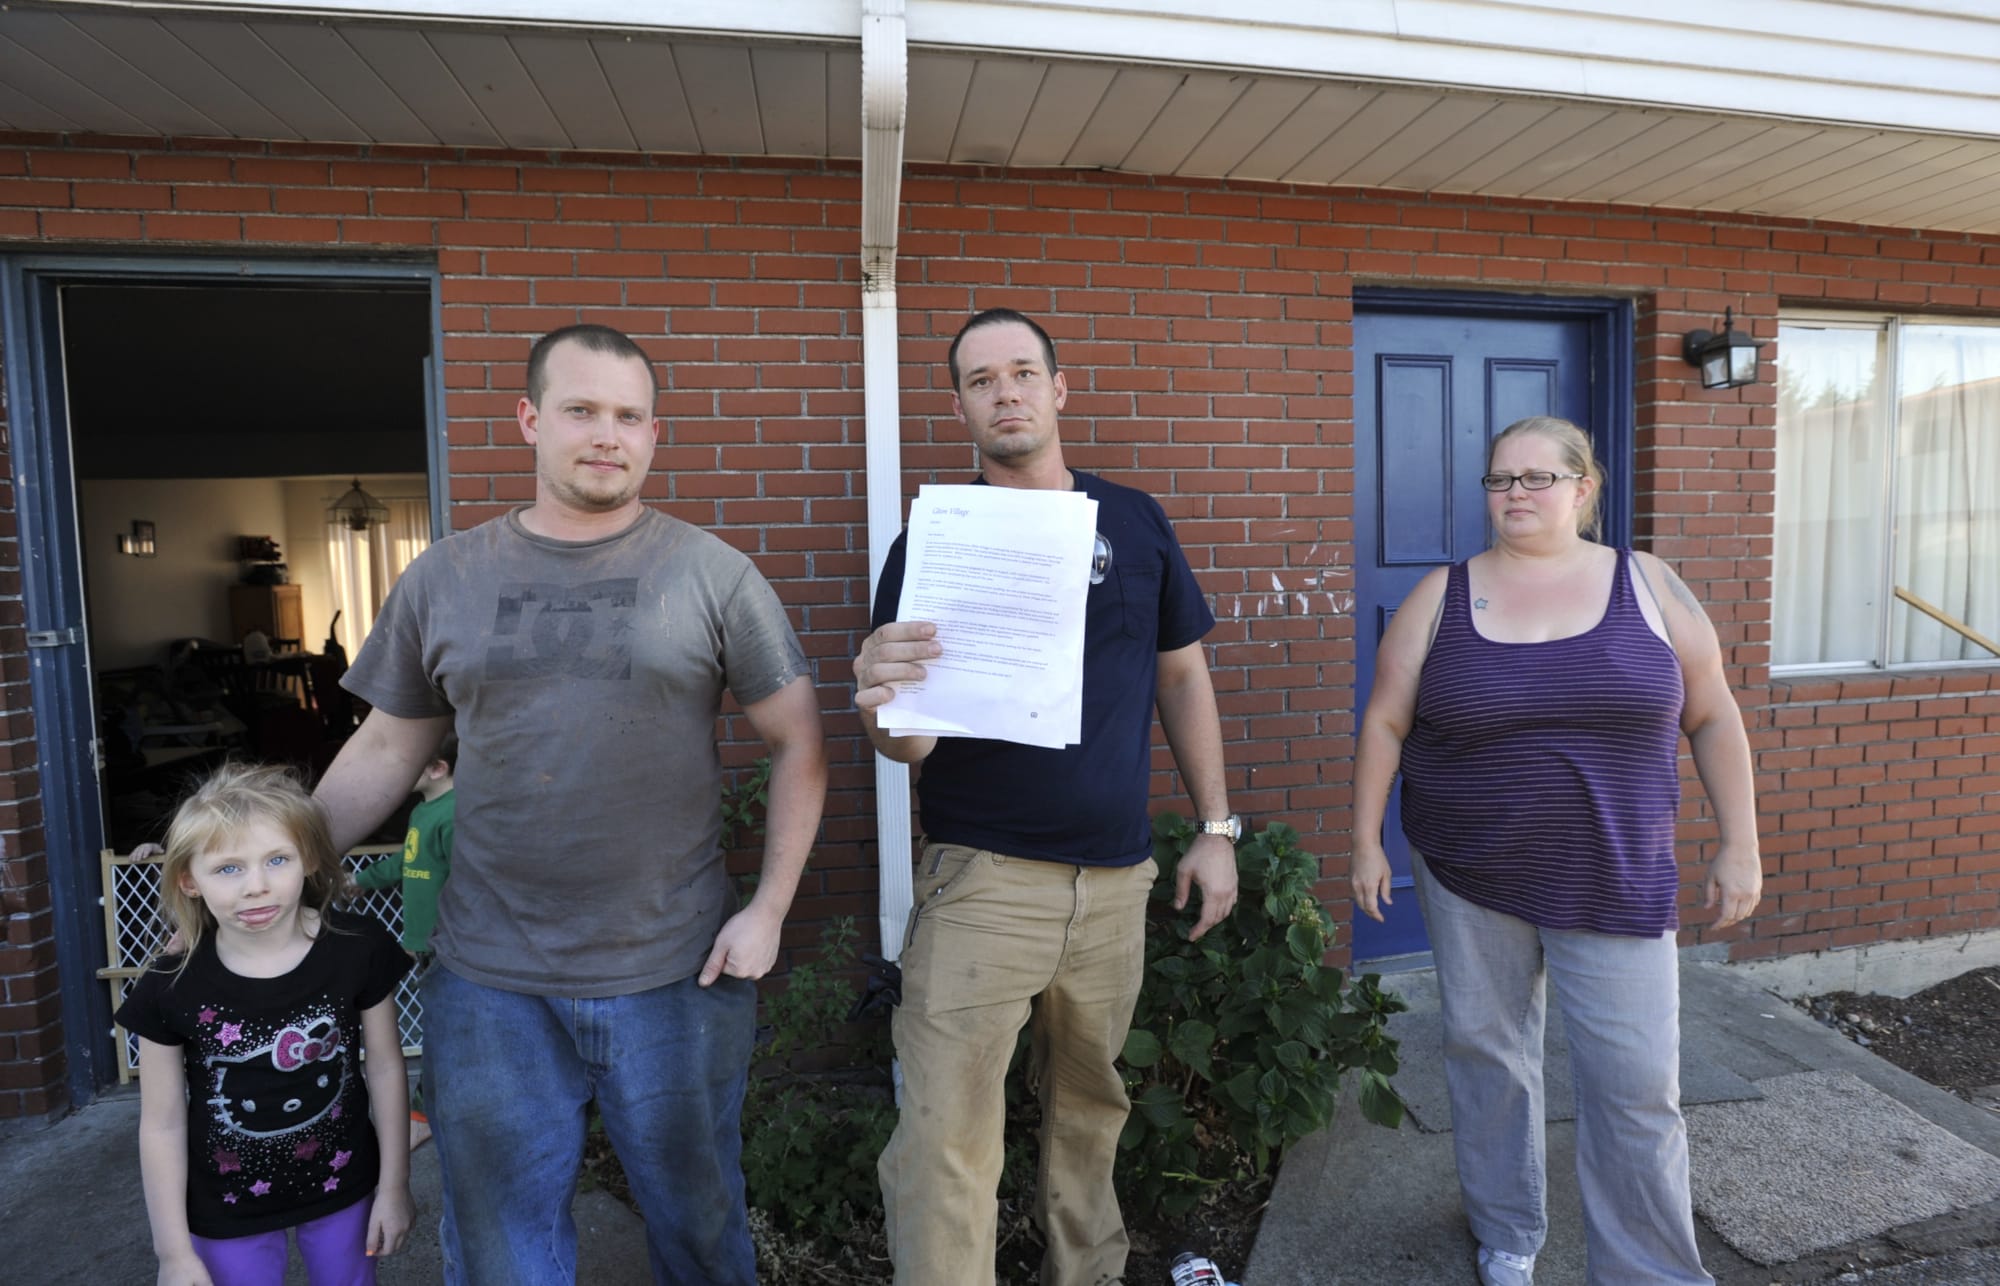 From left, Lilly Corder, Andrew Rickard, Brian Myers, holding the vacate notice, and Jaimie Lewis at the apartment complex where residents are being progressively issued vacate notices, at 1304 NE 88th in Hazel Dell, Wa., Wednesday Sept 9, 2015.